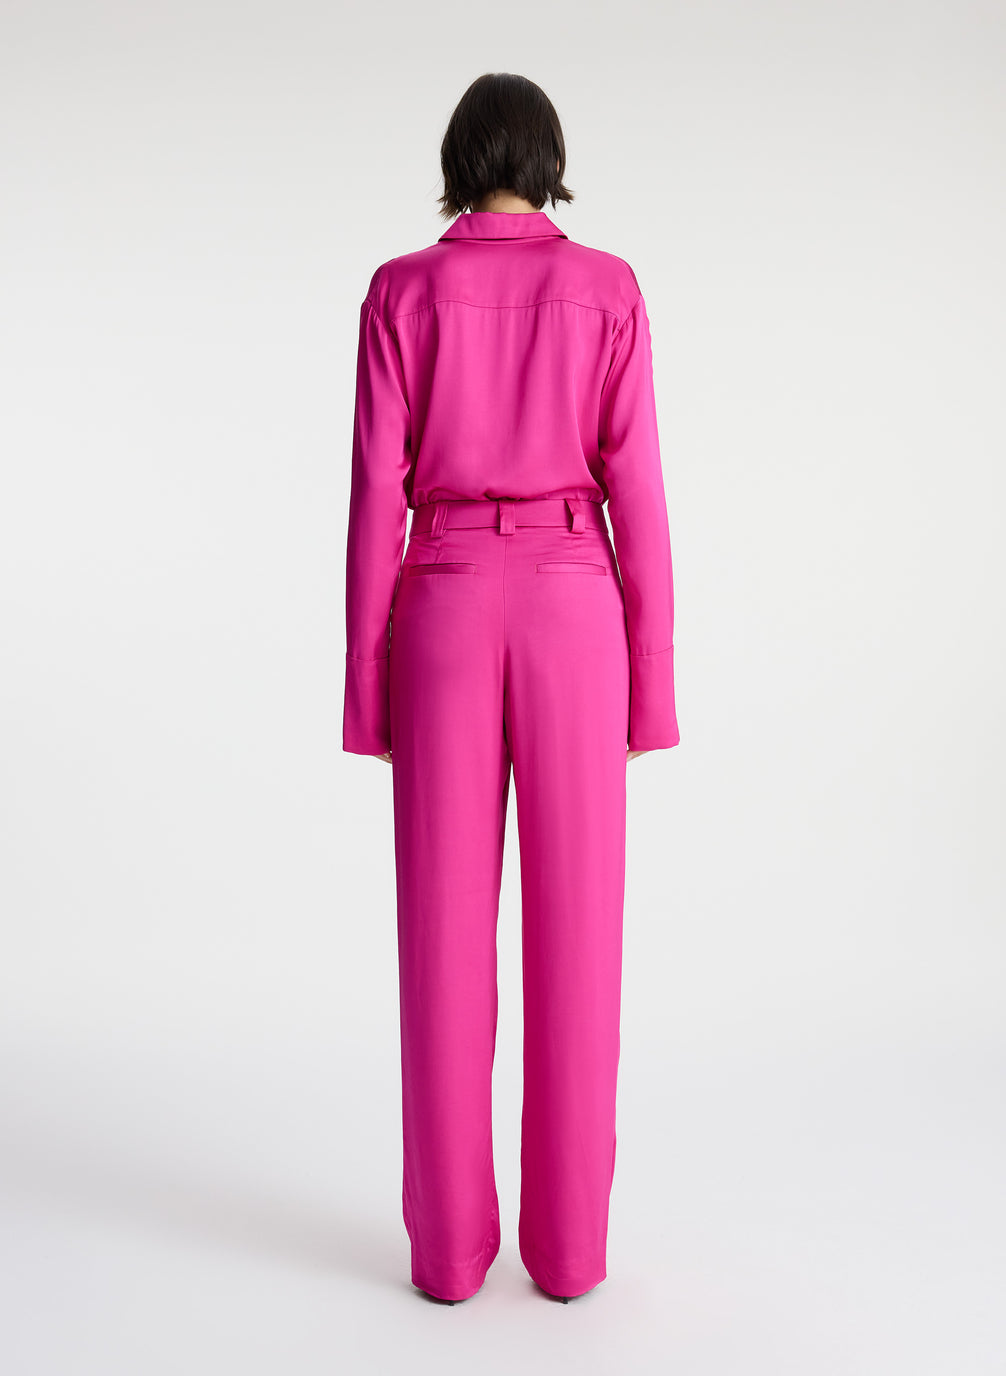 back view of woman wearing pink button down collared satin long sleeve shirt with matching pink satin pants